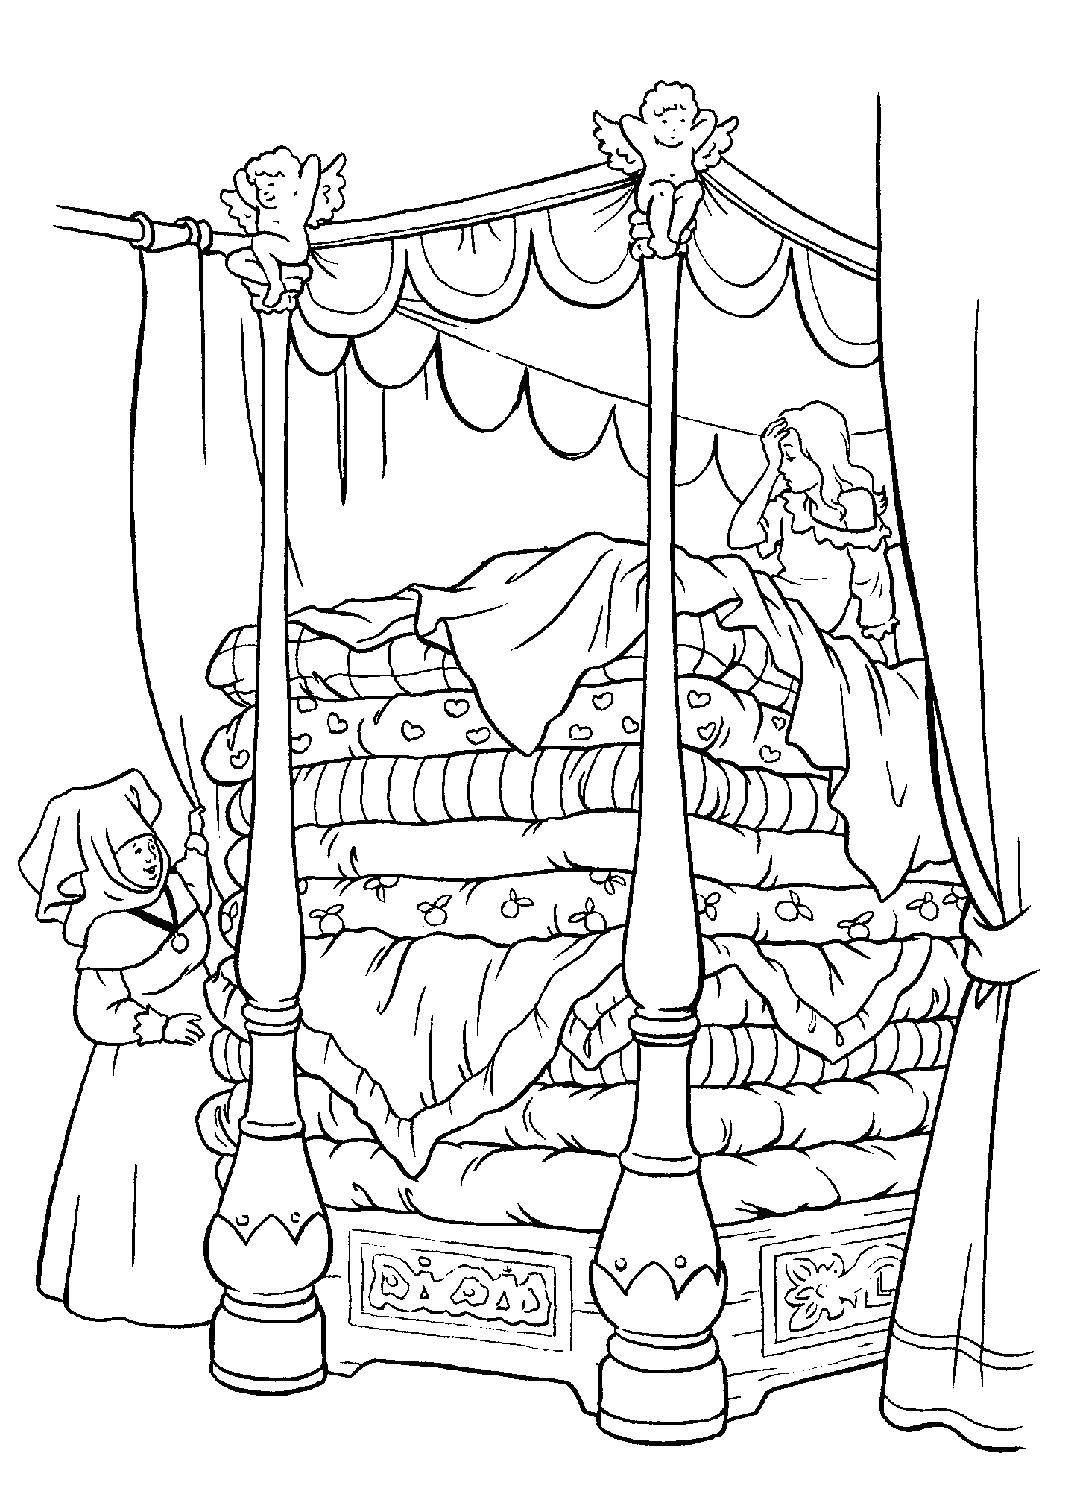 Coloring The Princess and the pea. Category the Princess and the pea. Tags:  Princess , pea.